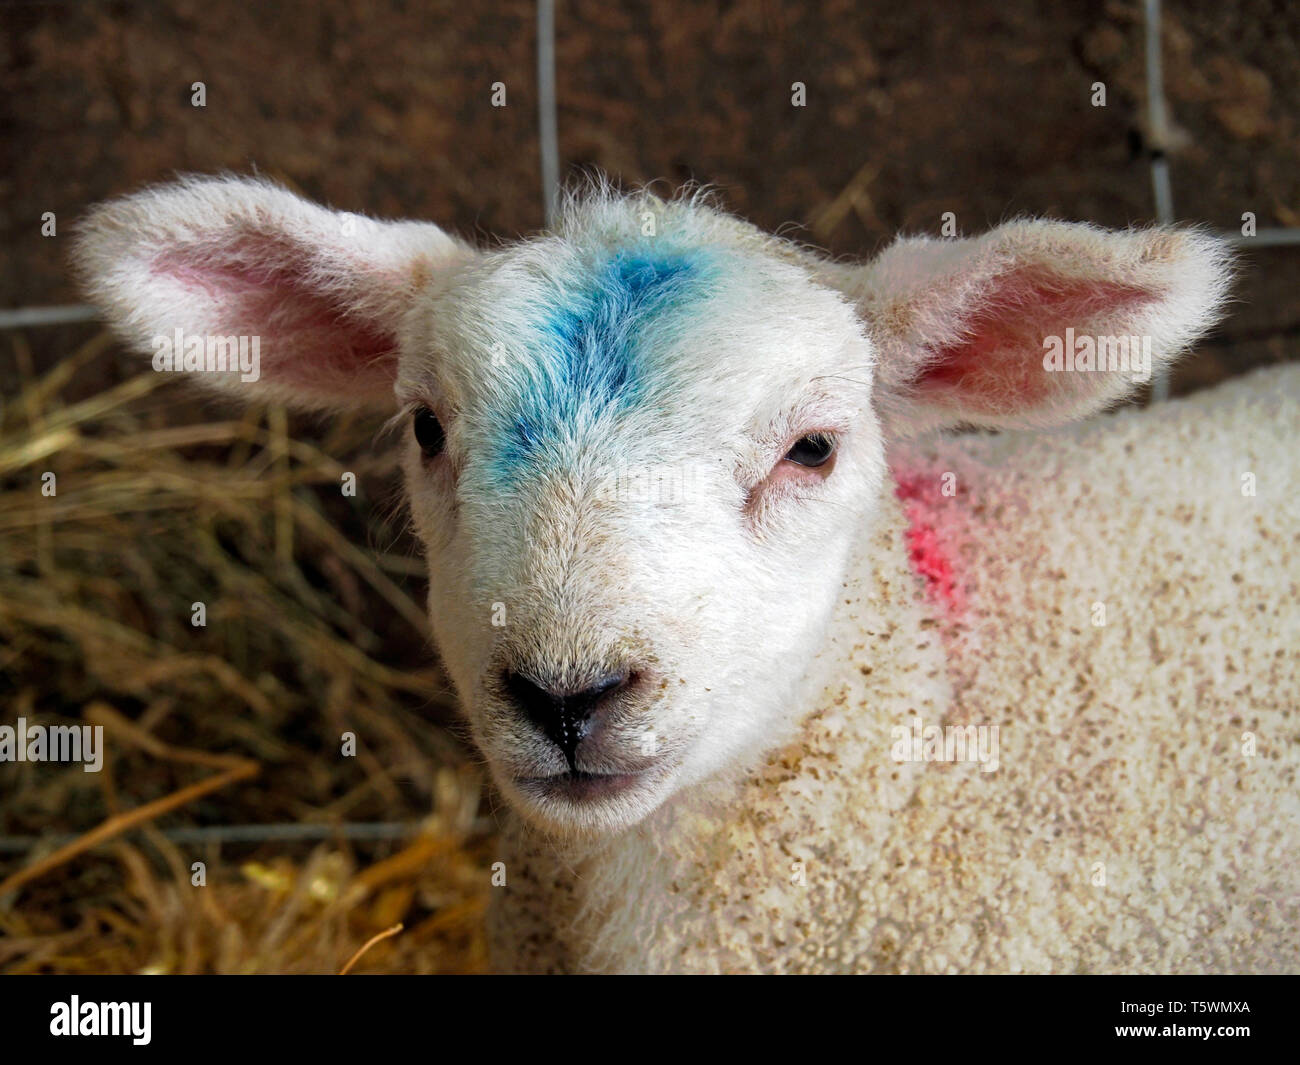 Close-up of the head of a young lamb lying on straw in a barn during lambing season. Barn lambing is easier for the farmer. Stock Photo